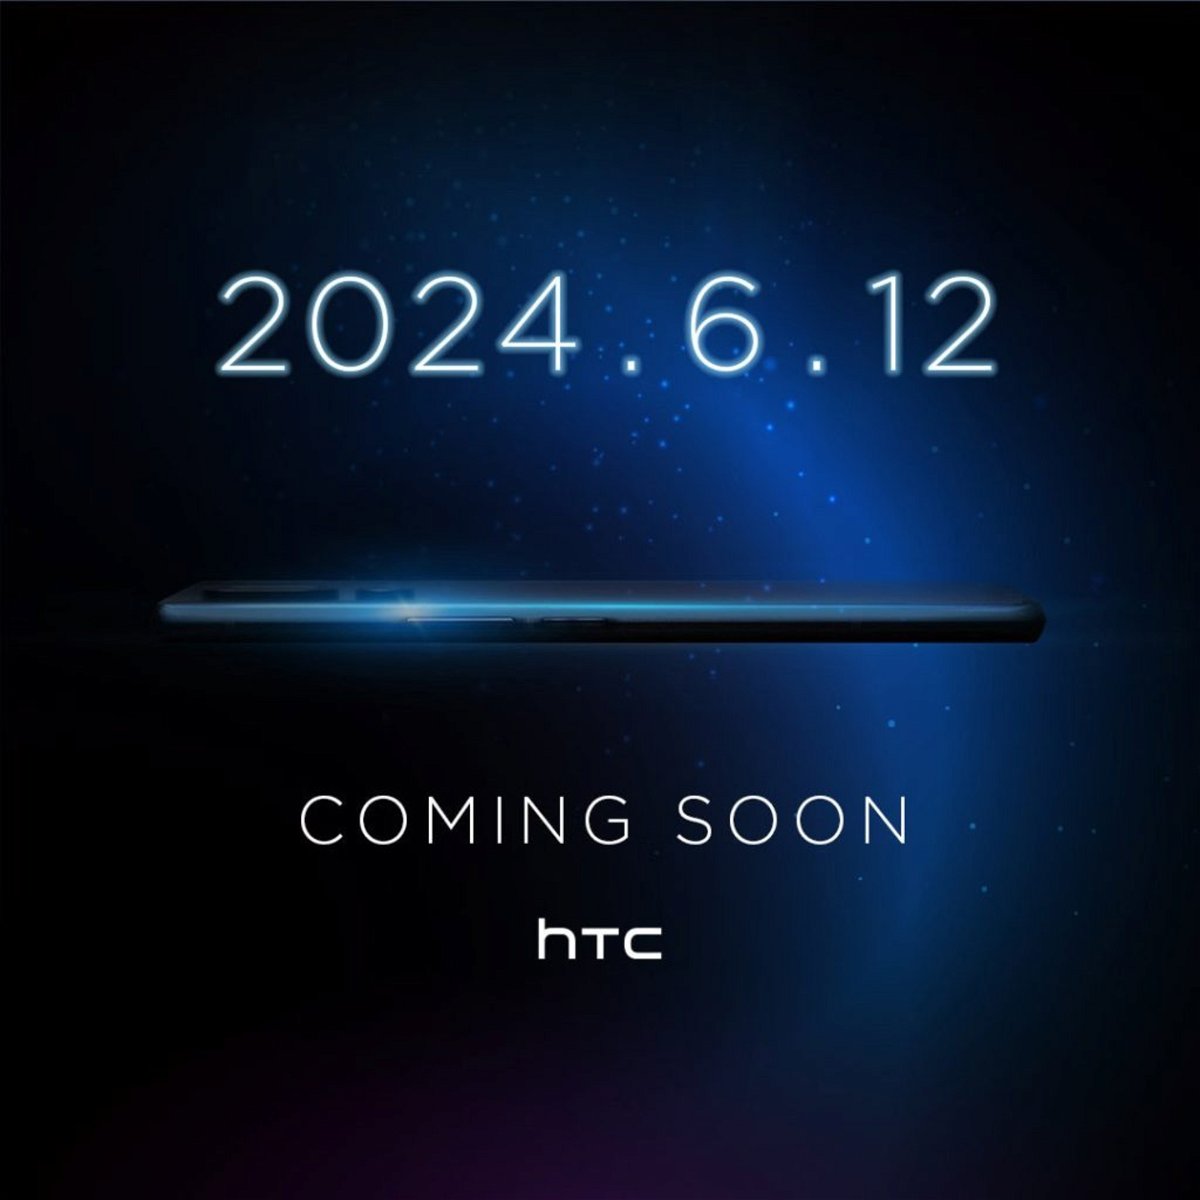 Launch poster for HTC new phone which will be released on June 12